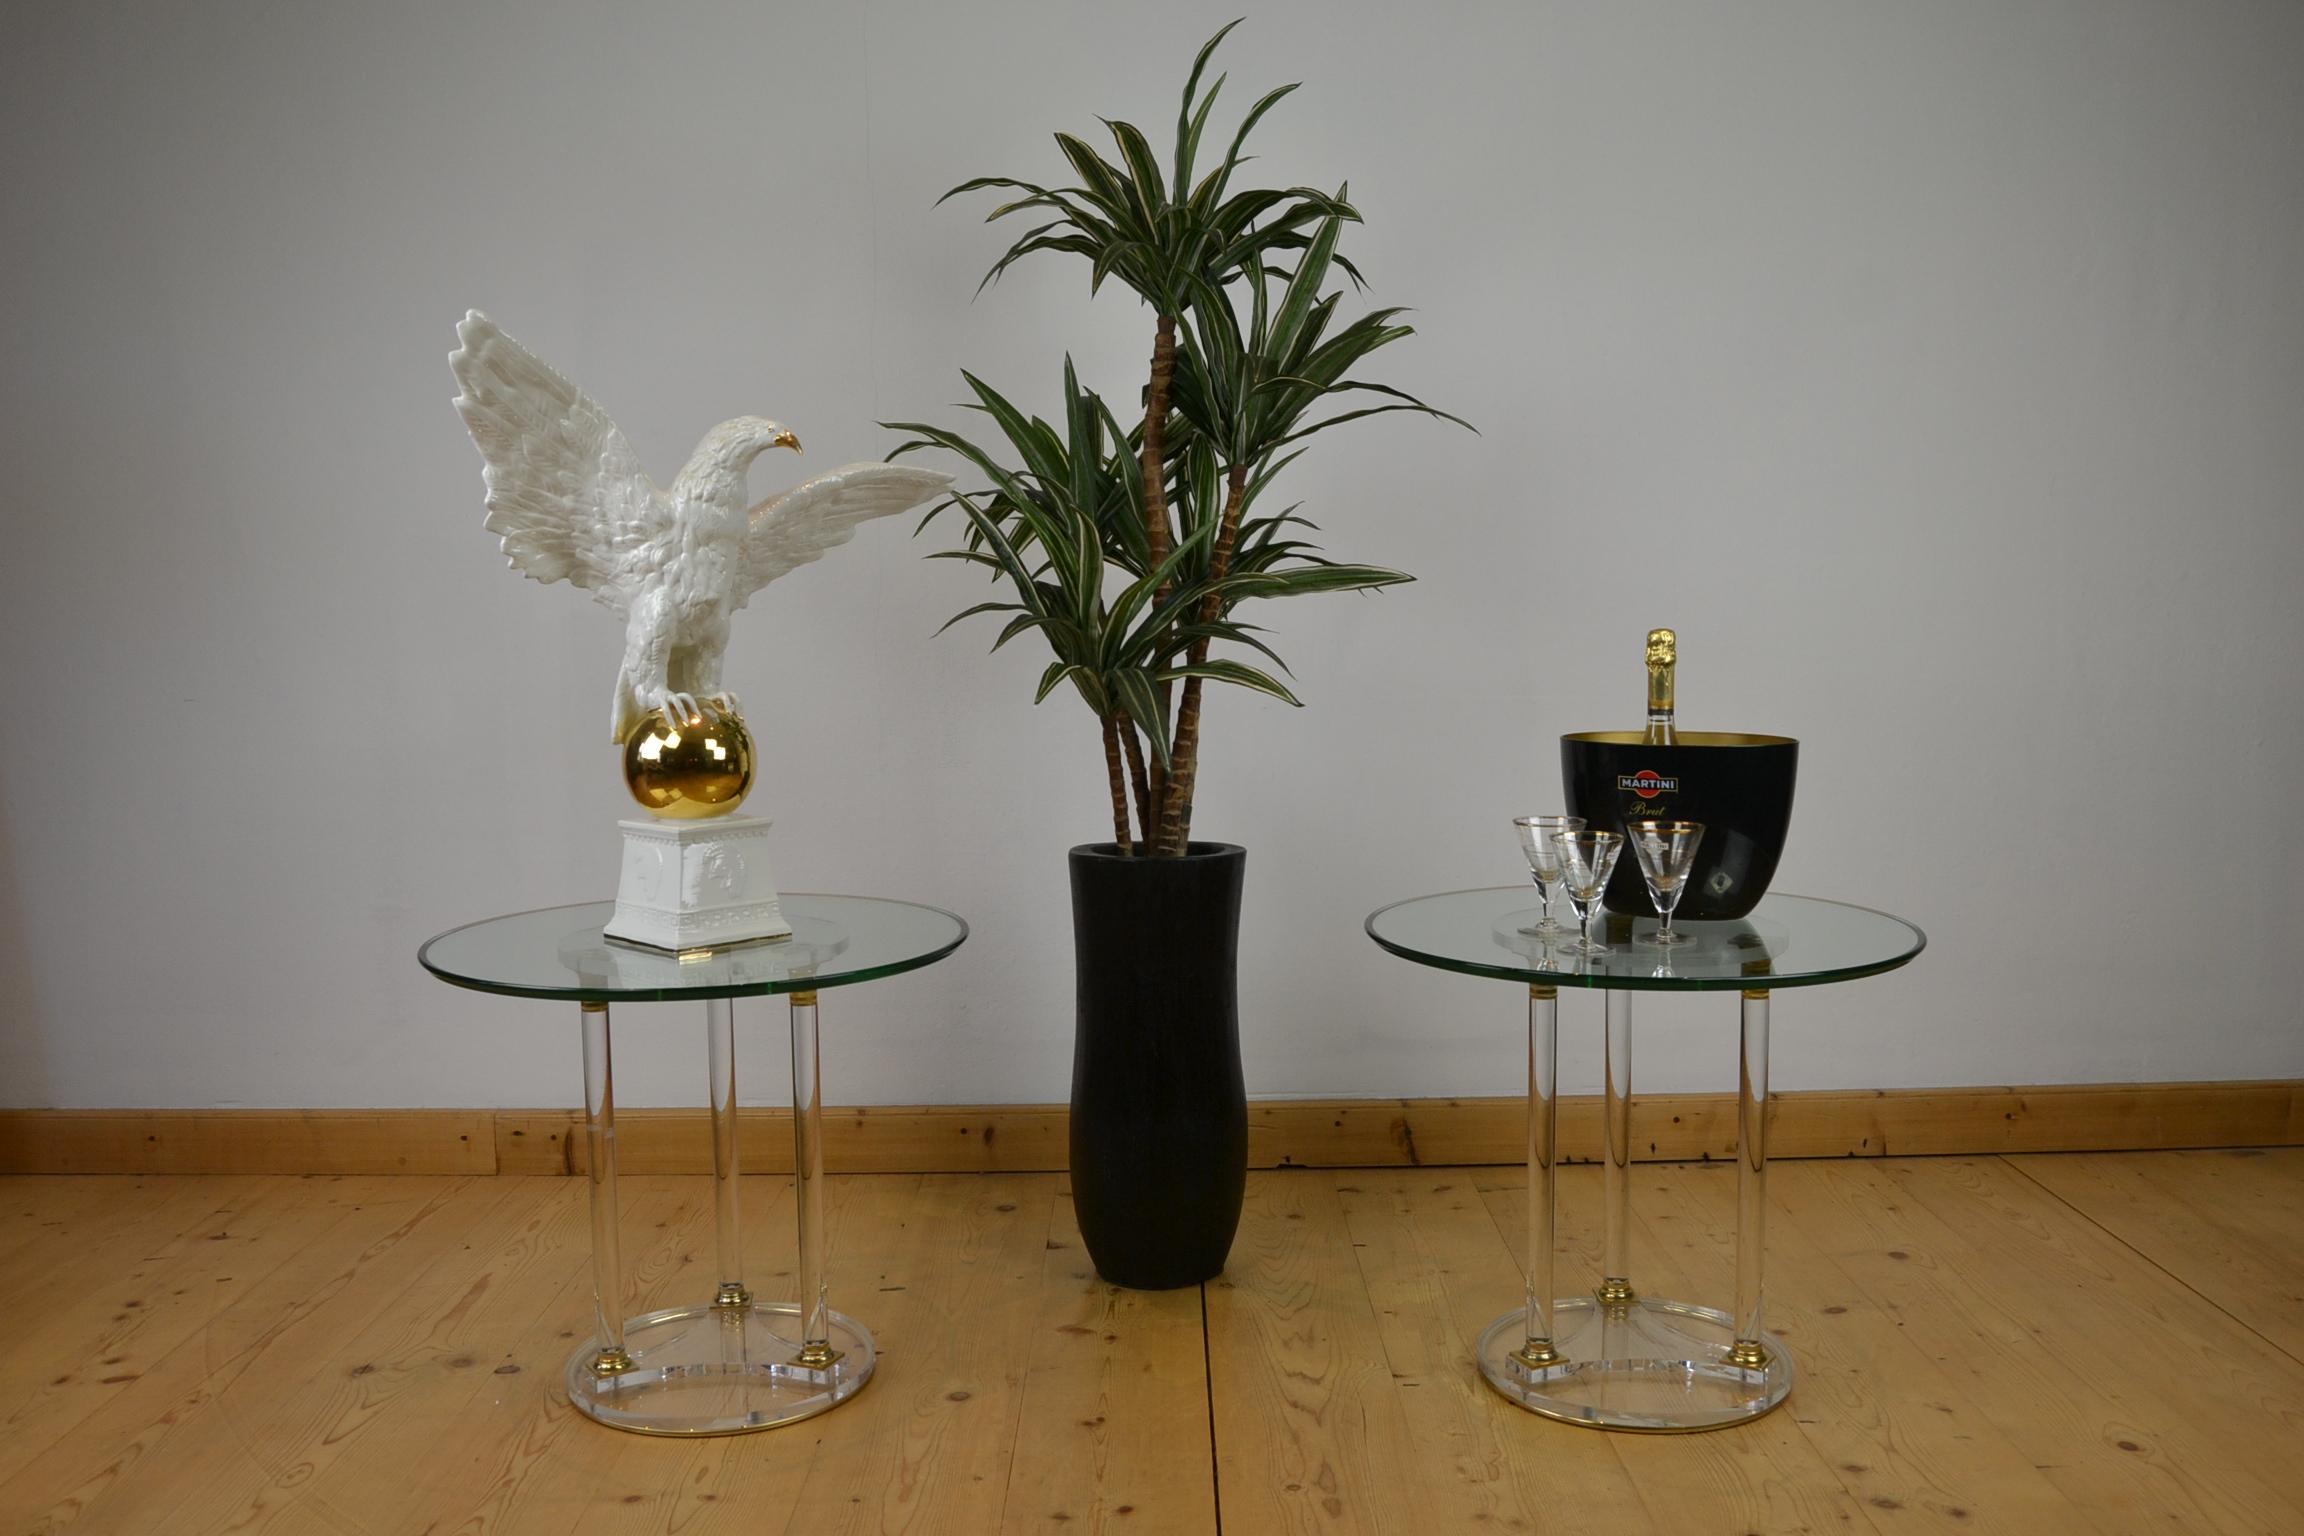 Pair of Round Lucite with Brass Side Tables, French Modern Design Tables , 1970s For Sale 10